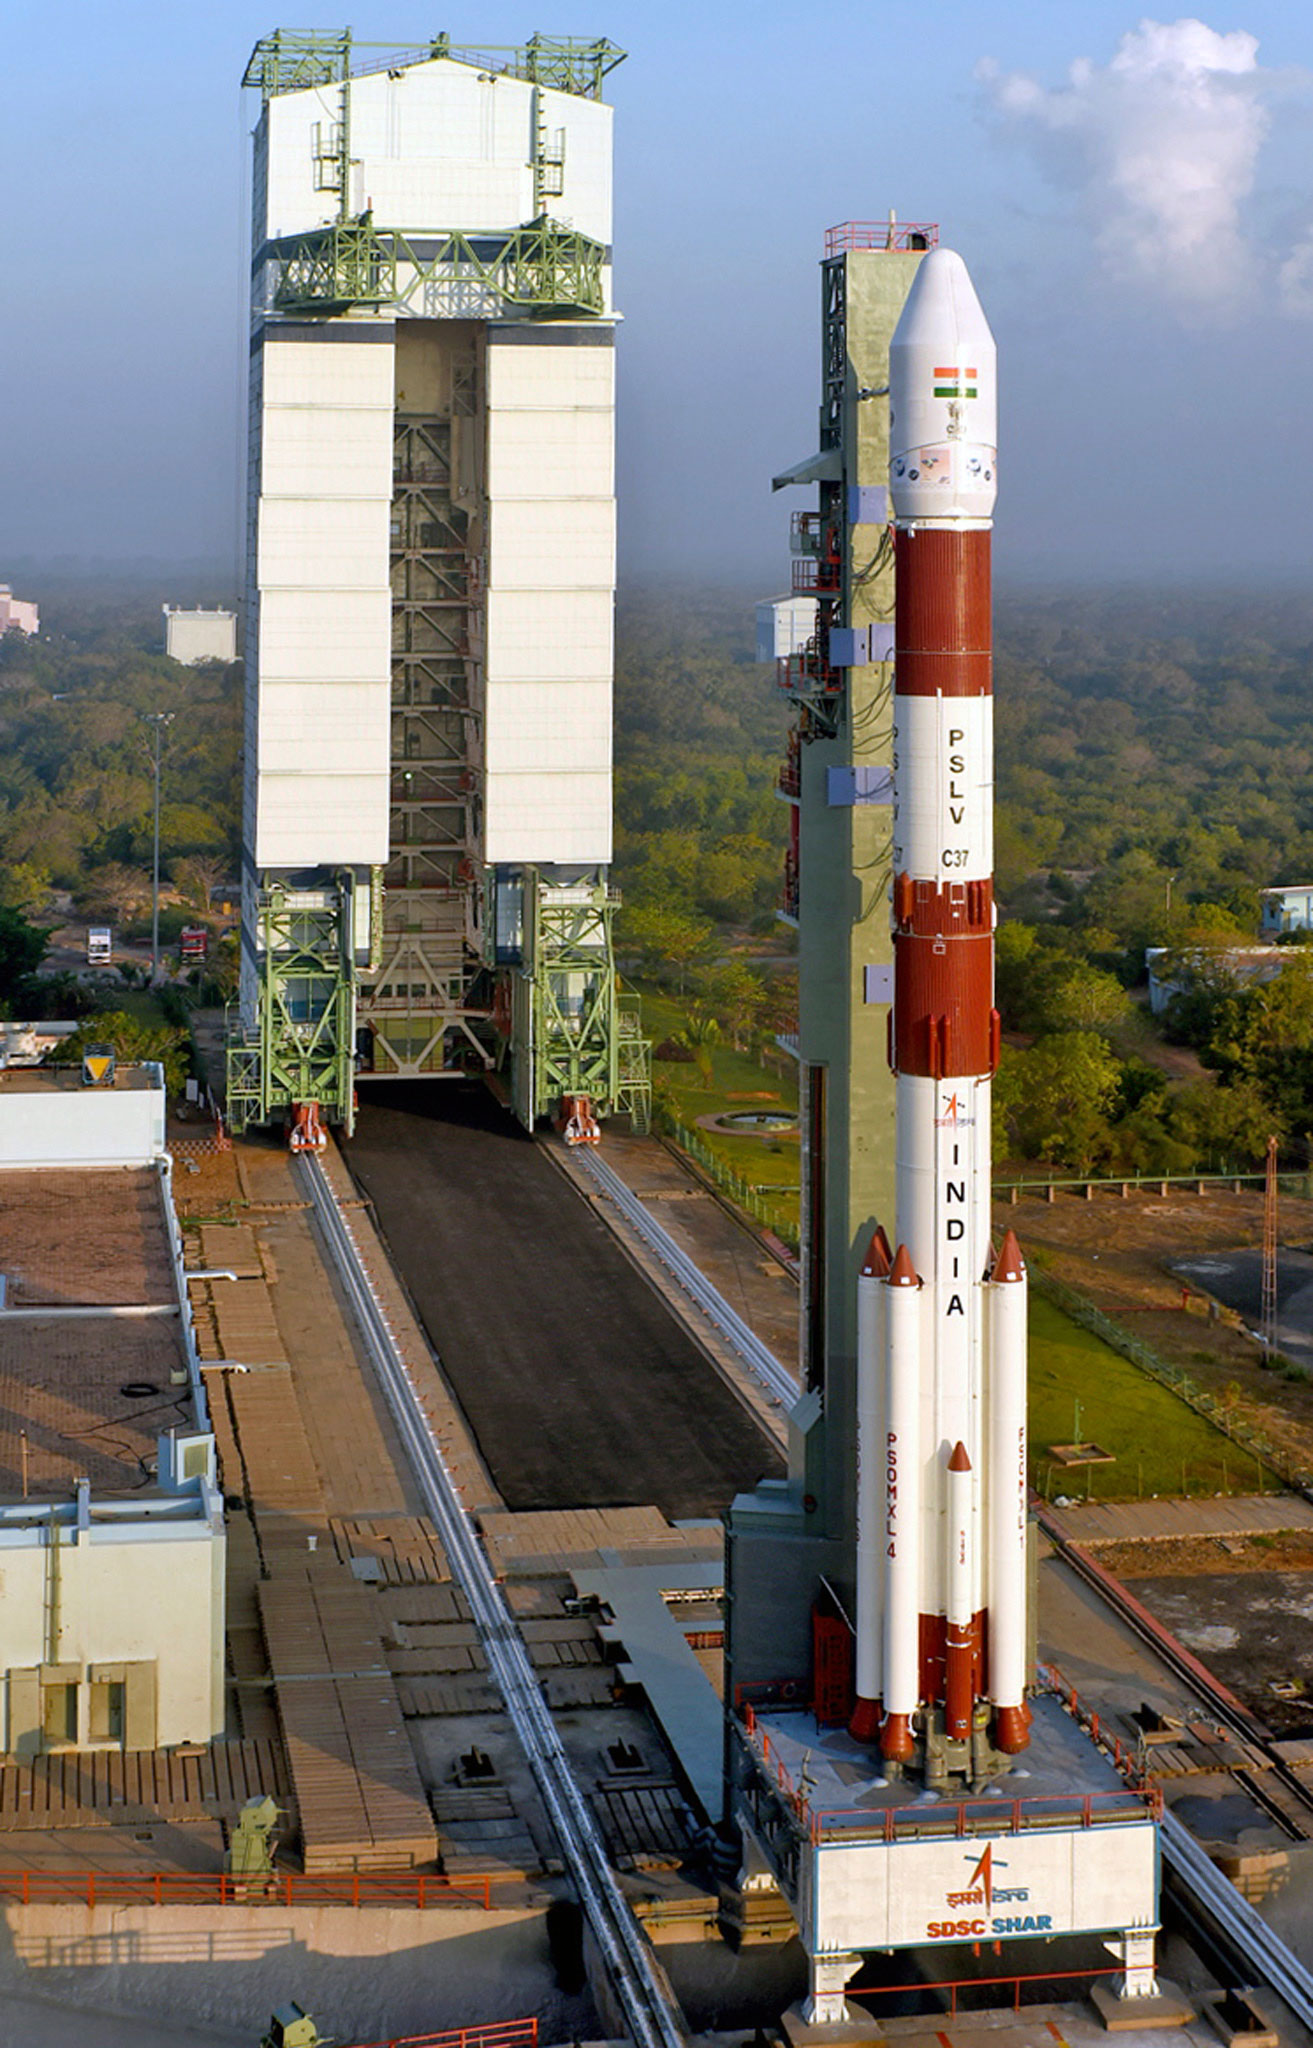 





Indian Space Research Organisation (ISRO) built the PSLV-C37 seen here with a Mobile Service Tower at the Satish Dhawan Space Centre in Sriharikota [EPA]





Indian Space Research Organisation (ISRO) built the PSLV-C37 seen here with a Mobile Service Tower at the Satish Dhawan Space Centre in Sriharikota [EPA]